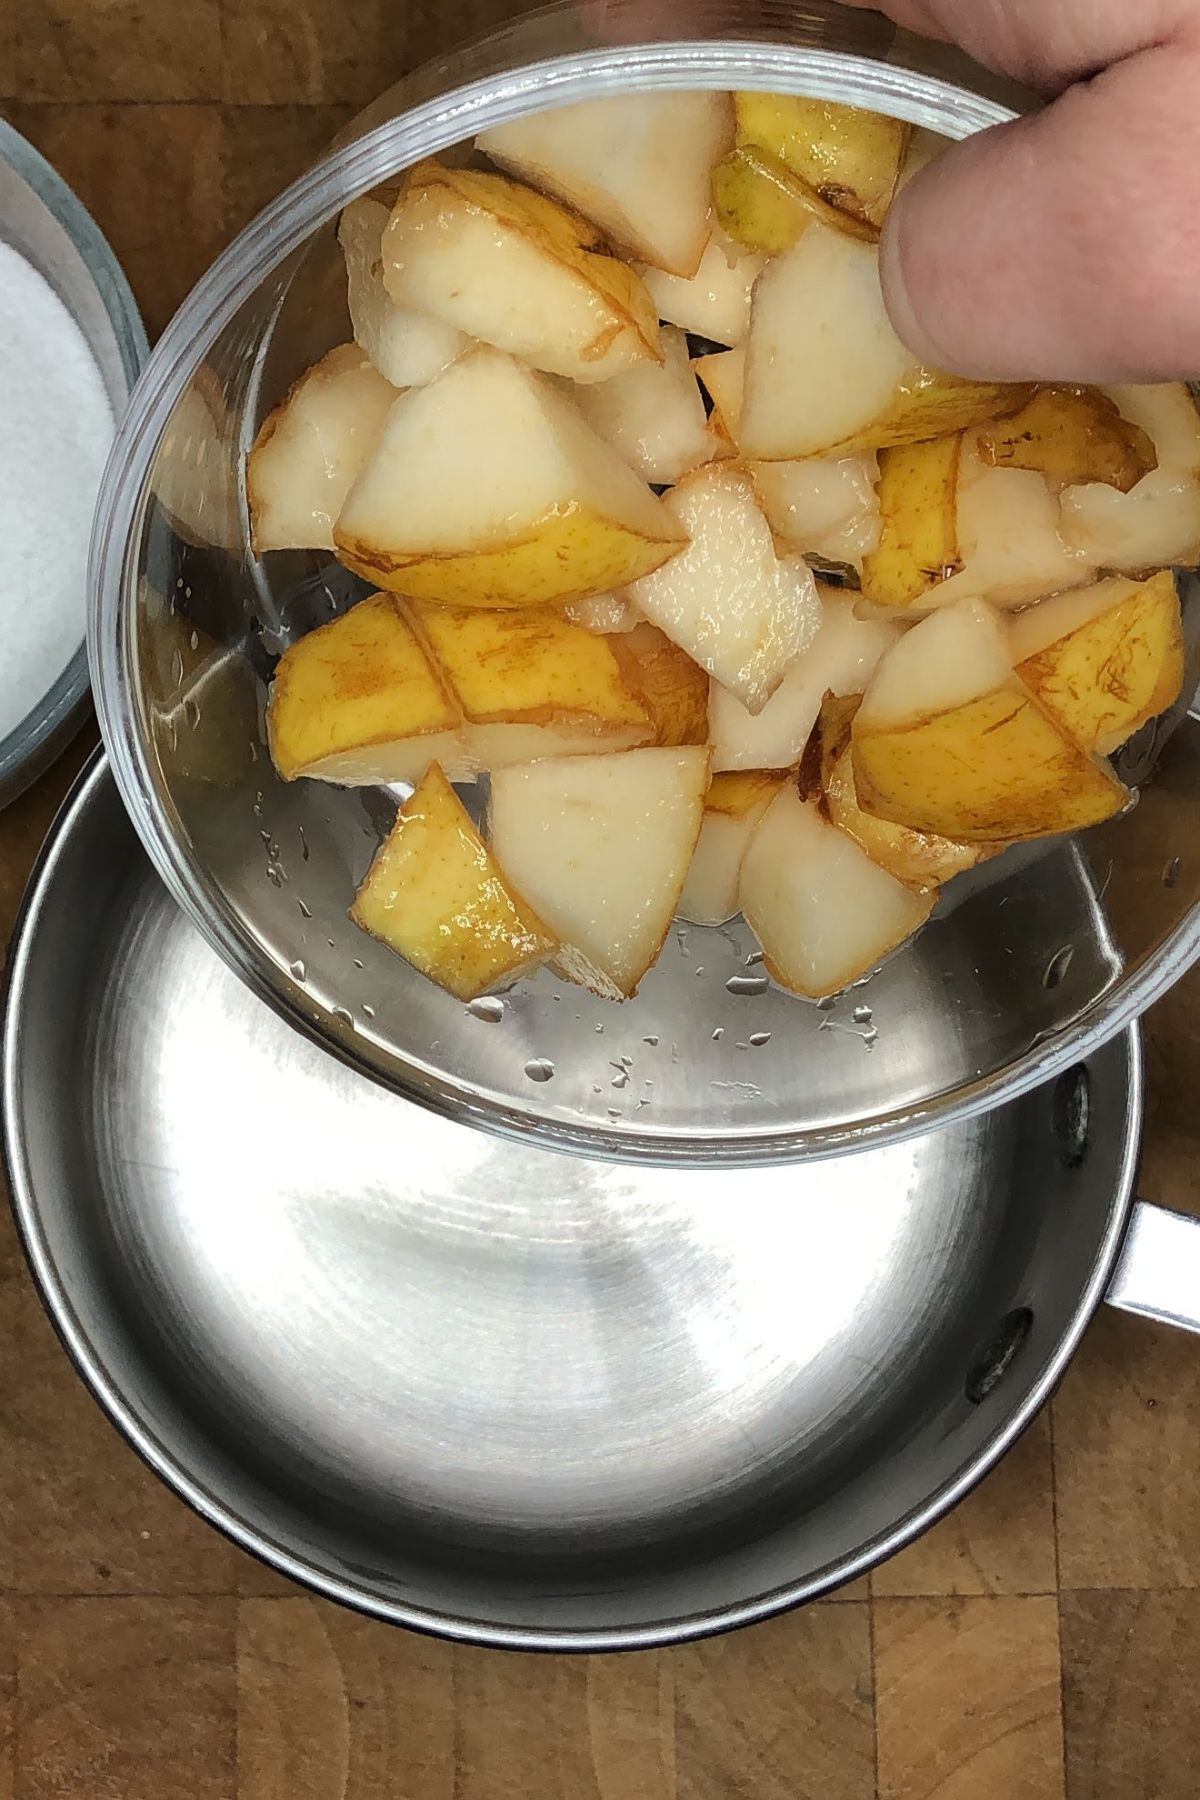 Pouring sliced pears into a pot.